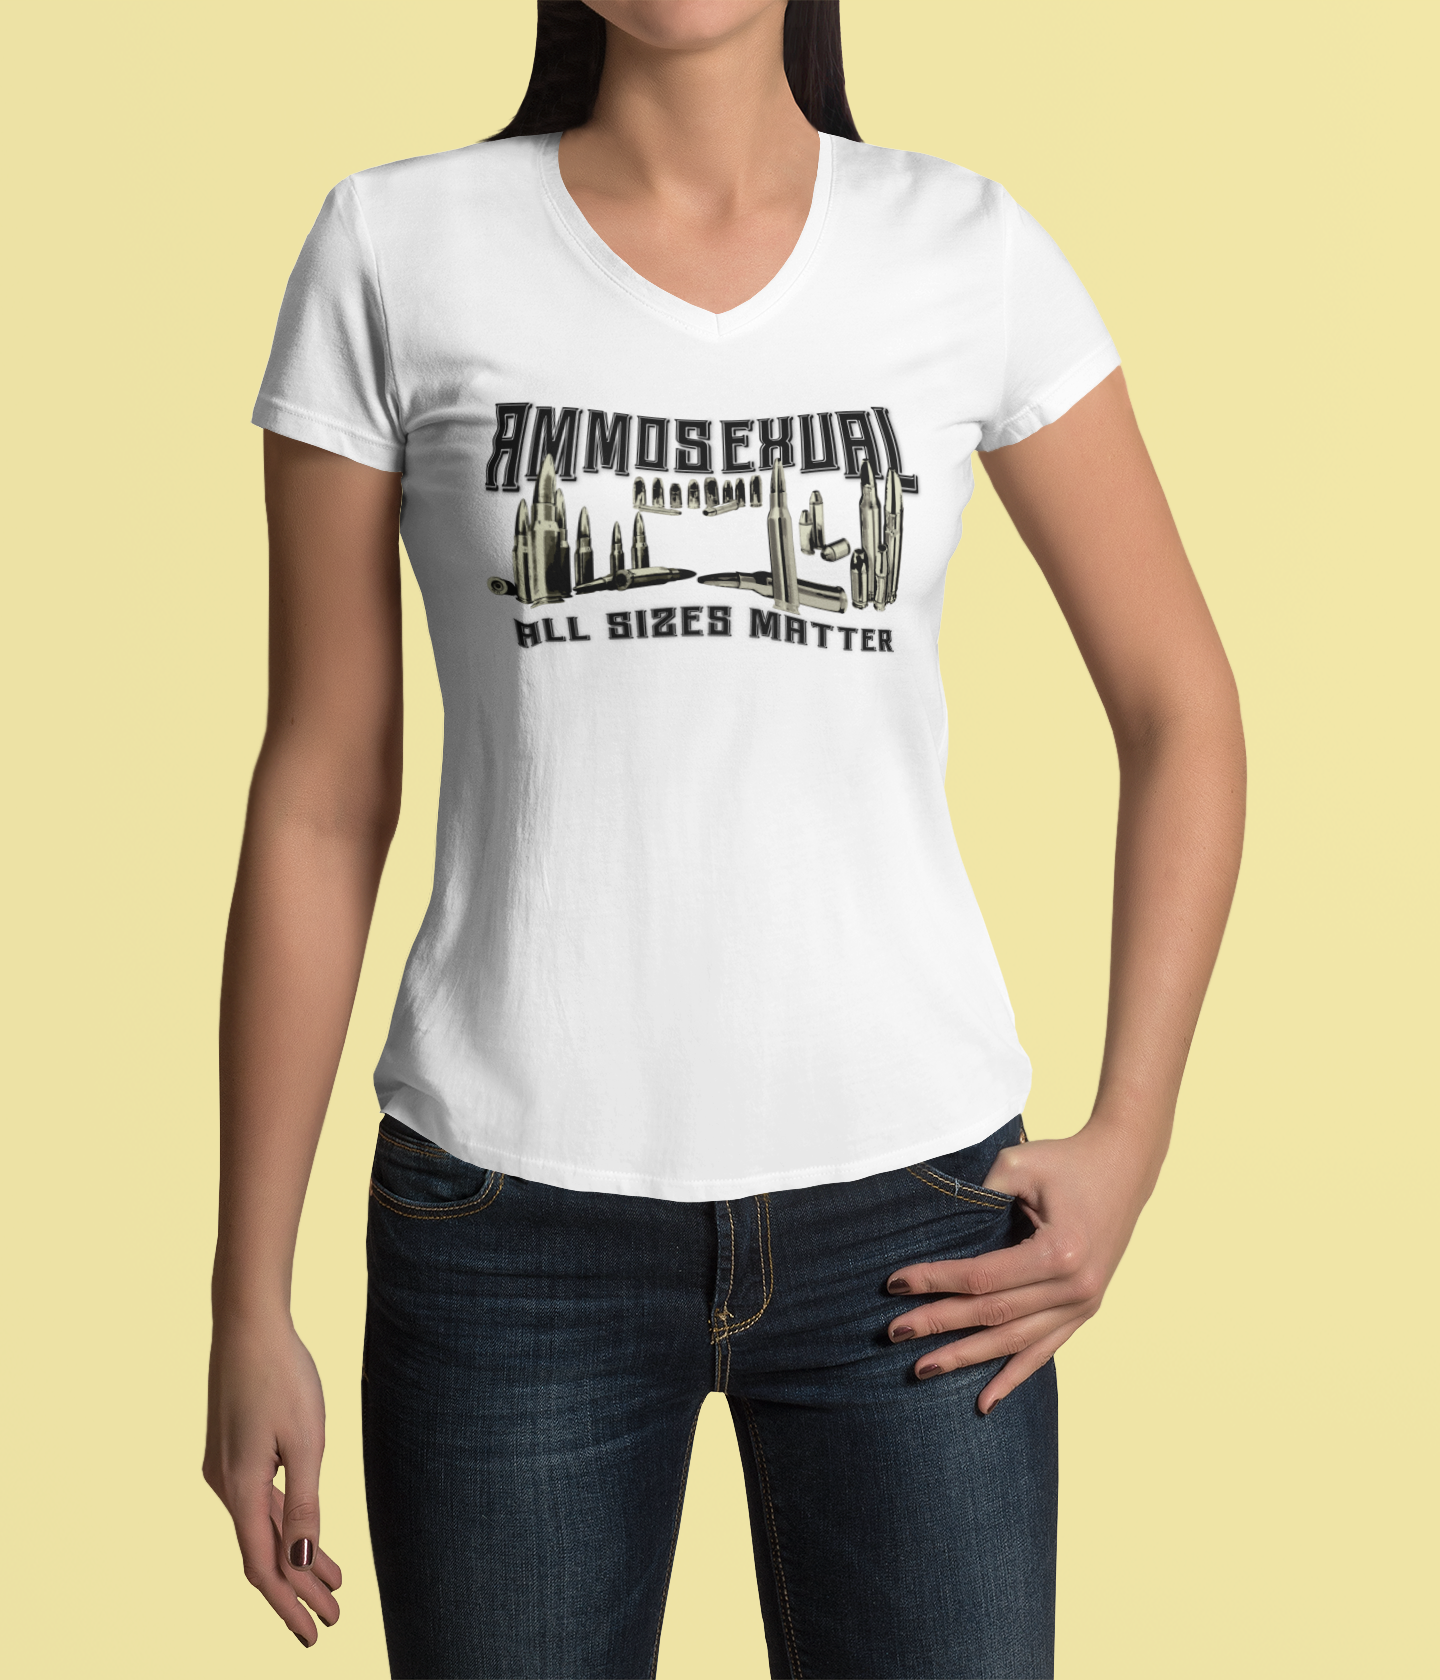 AMMOSEXUAL WOMANS VNECK